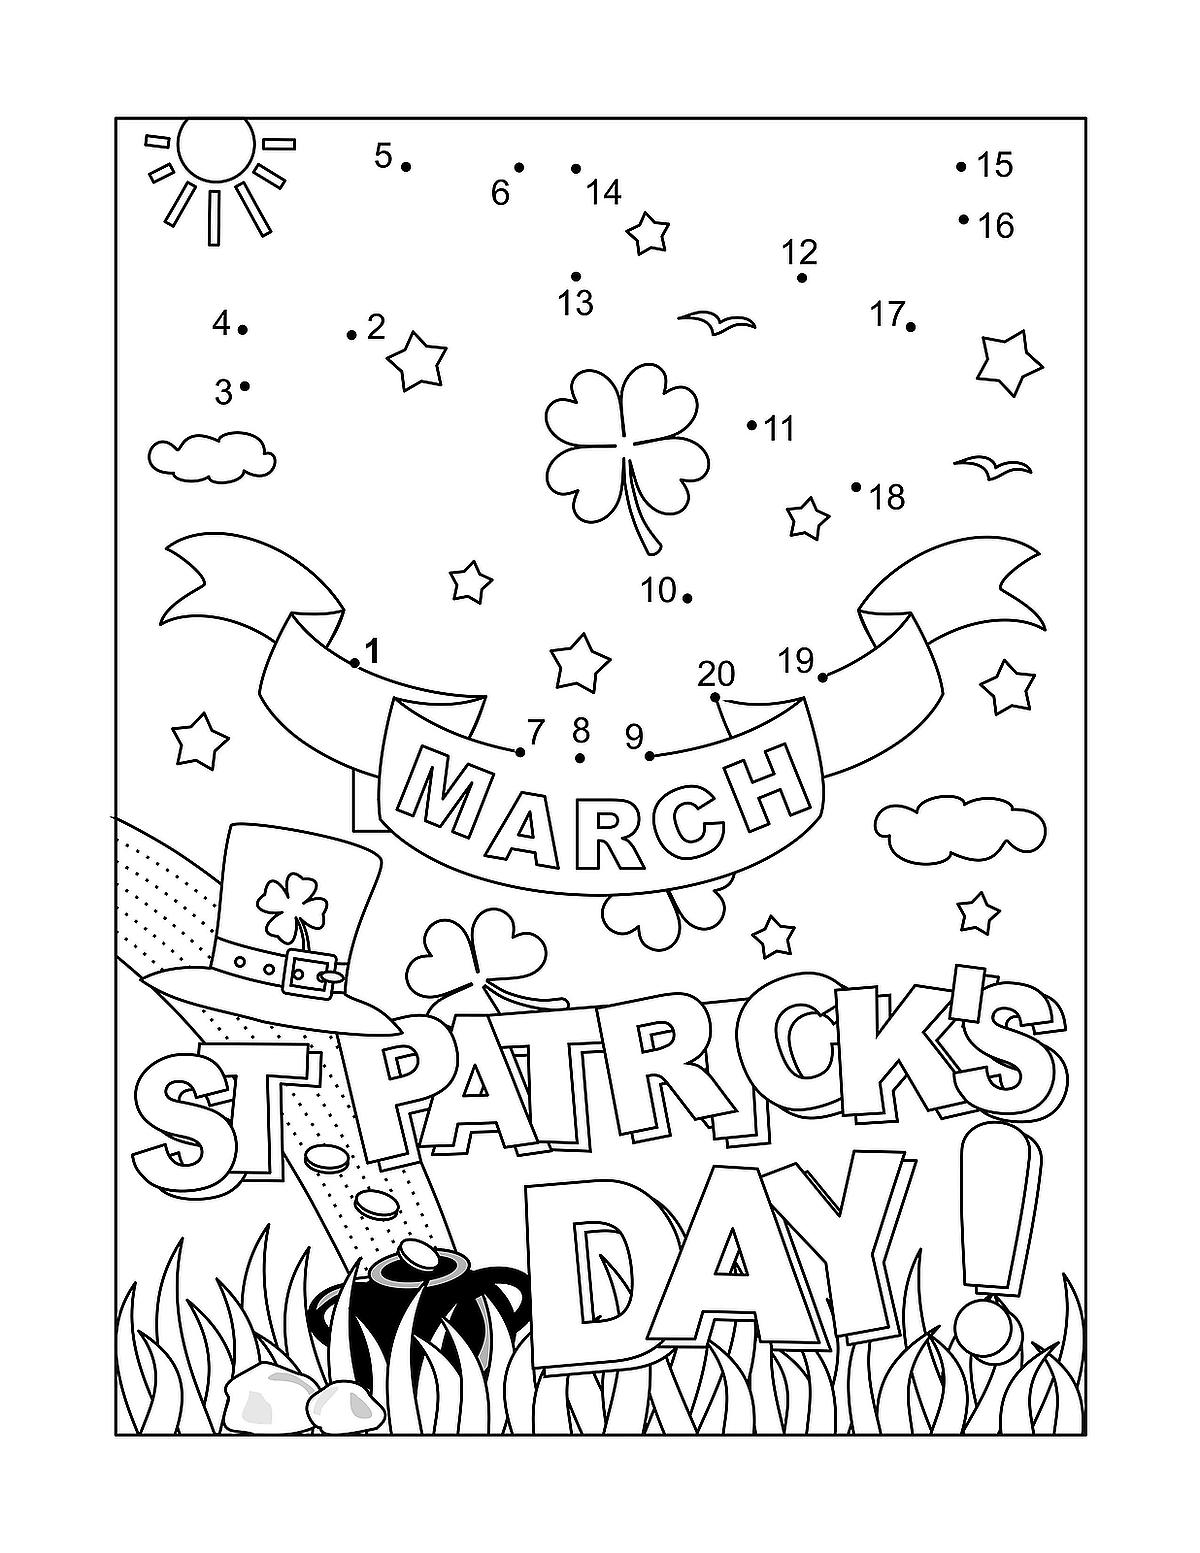 St patricks day coloring pages free printable coloring pages of shamrocks leprechauns more printables mom